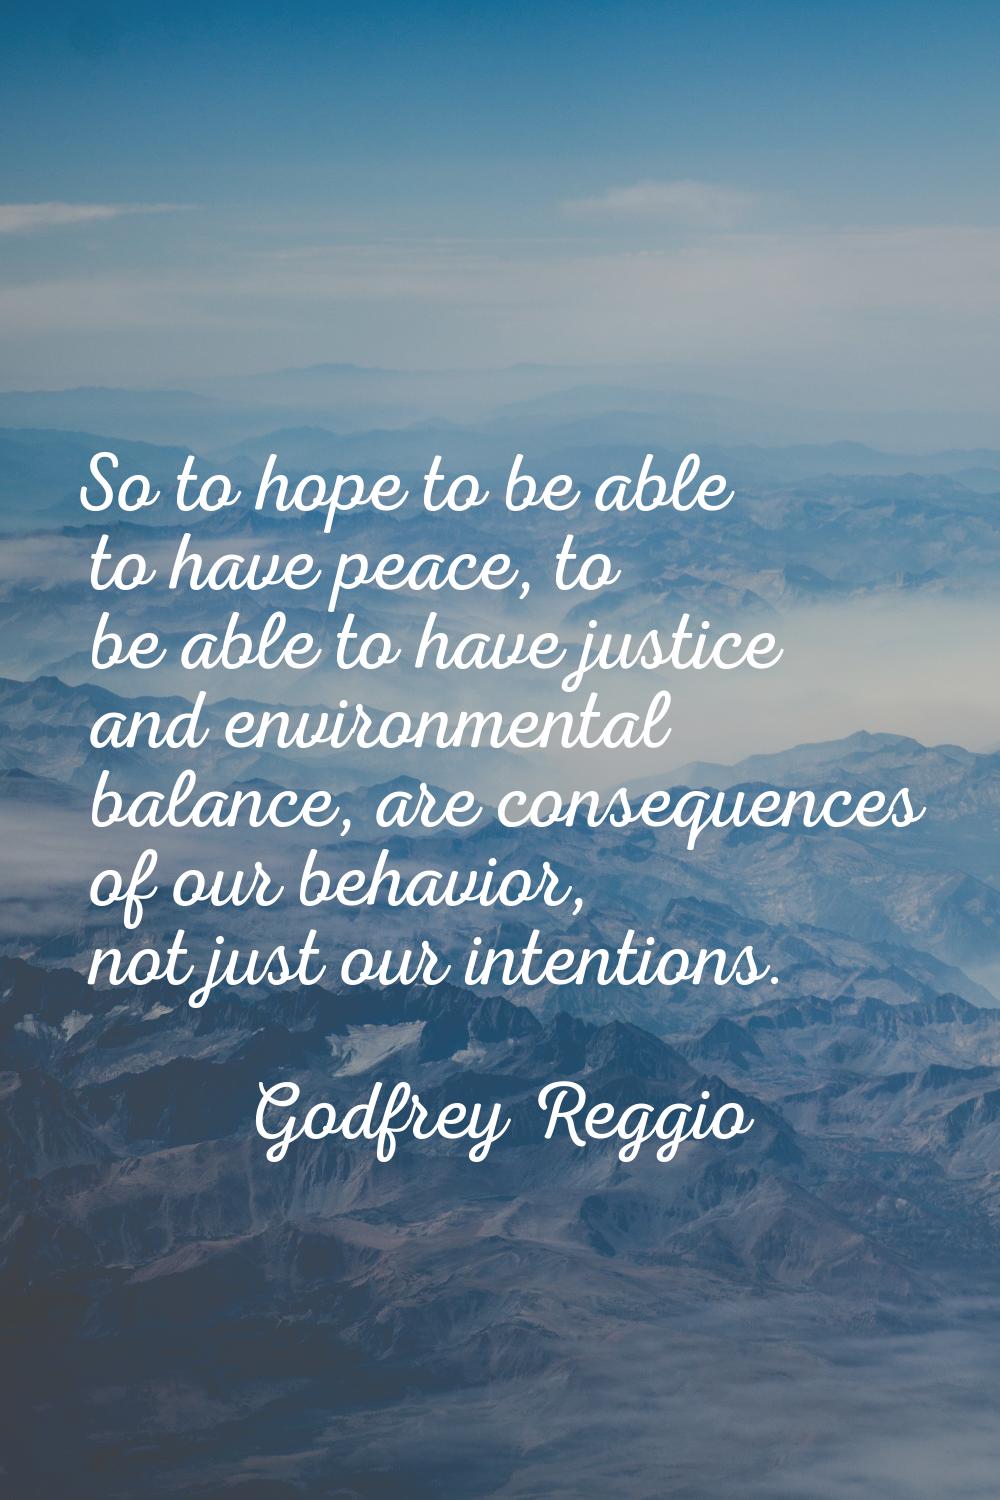 So to hope to be able to have peace, to be able to have justice and environmental balance, are cons